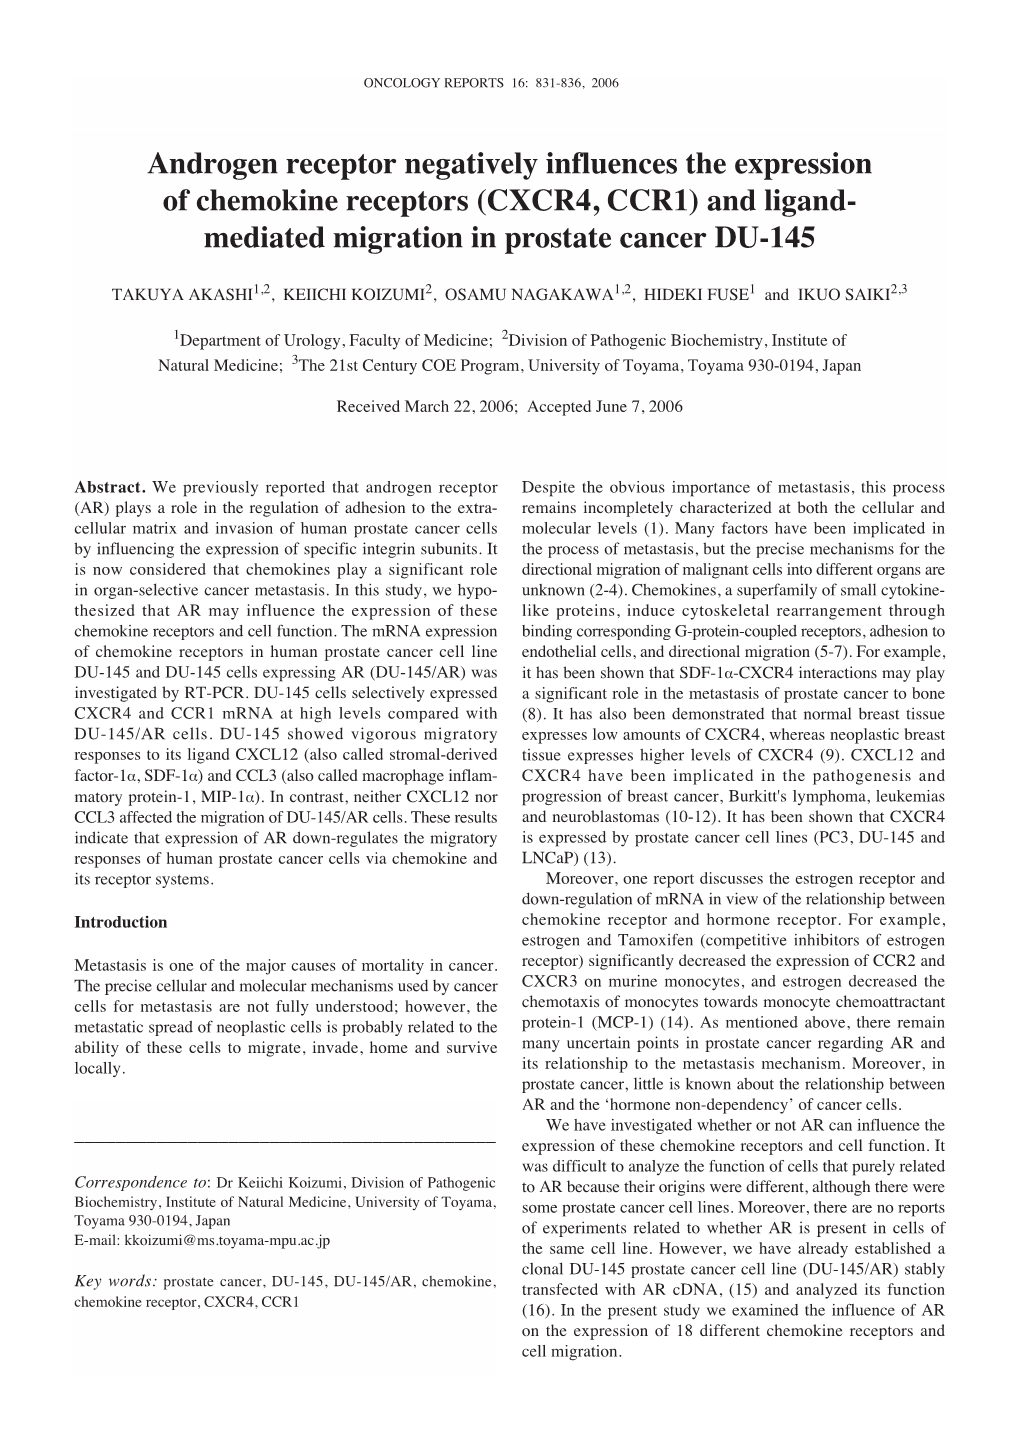 Androgen Receptor Negatively Influences the Expression of Chemokine Receptors (CXCR4, CCR1) and Ligand- Mediated Migration in Prostate Cancer DU-145